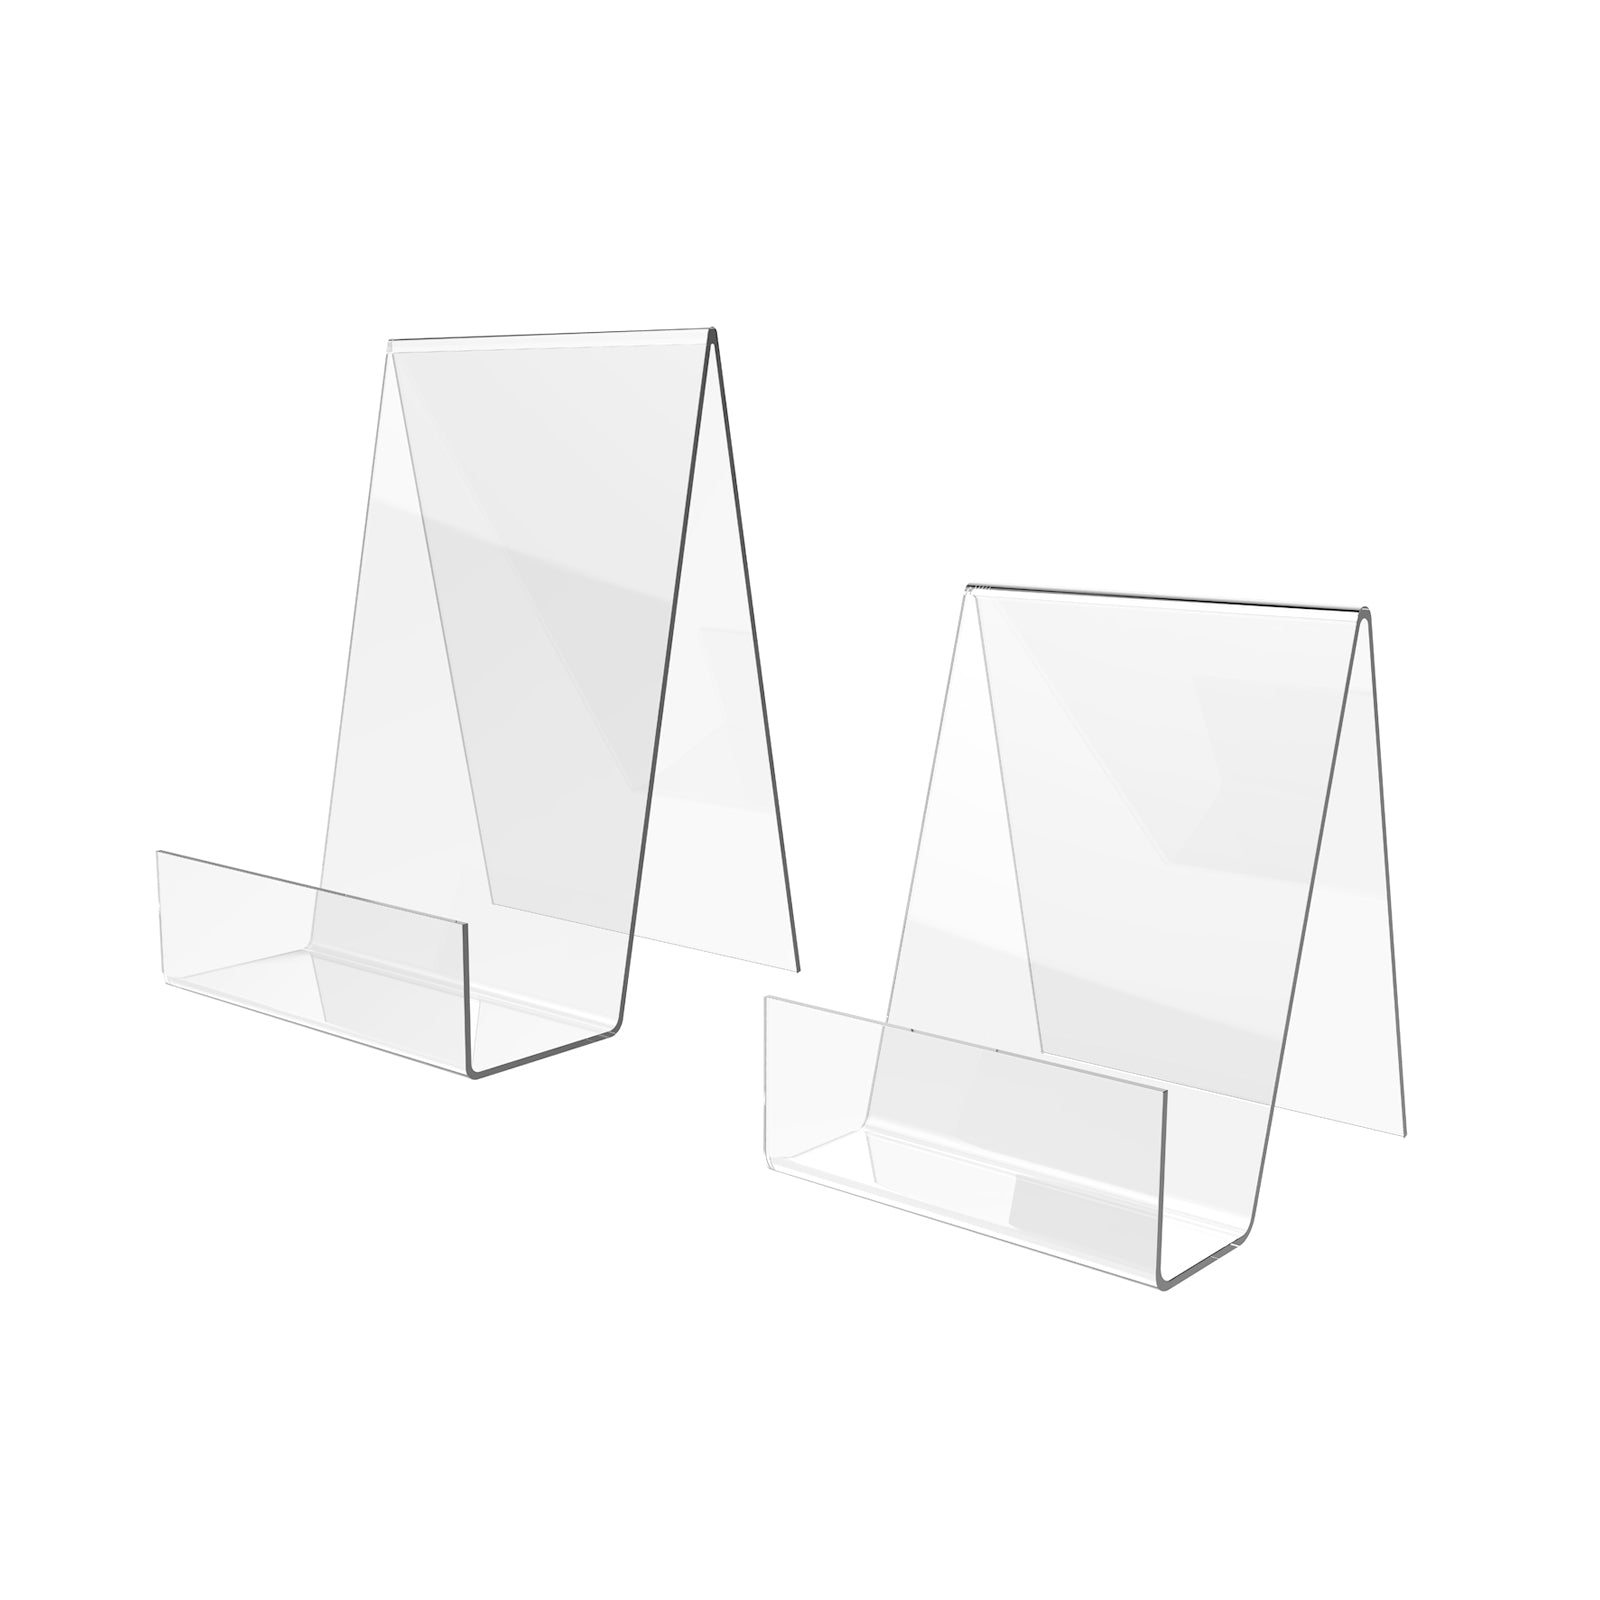 ZOEY Acrylic Book Stand with Ledge Clear Display Easels Plate - 5